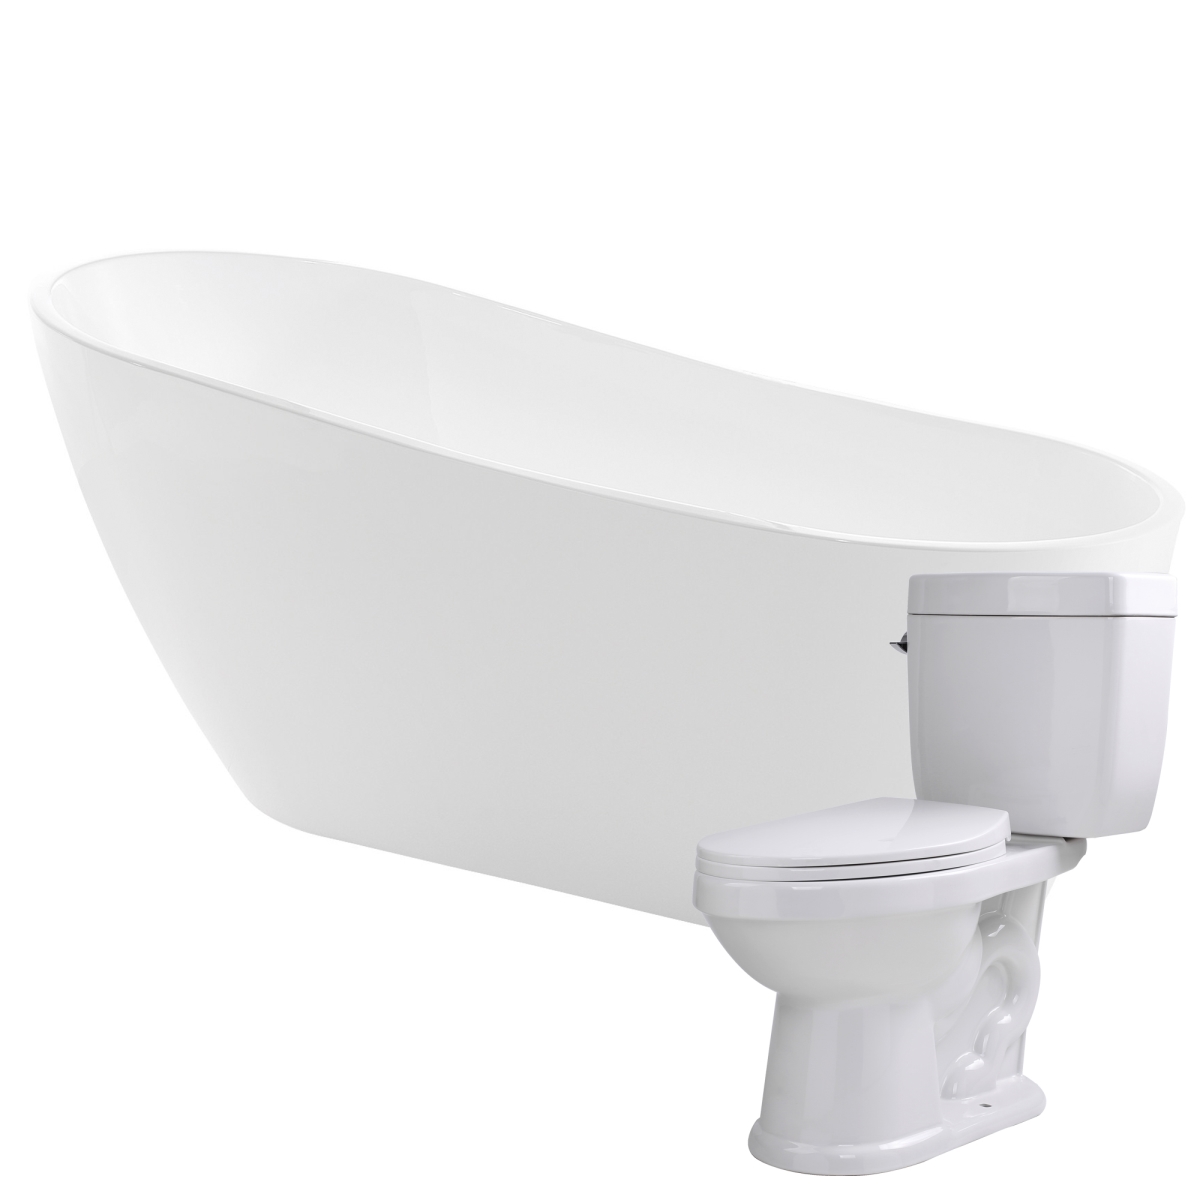 SWCORP Anzzi FTAZ093-T055 Trend 67 in. Acrylic Flatbottom Non-Whirlpool Bathtub in White with Kame 2-Piece 1.28 GPF Single Flush Toilet